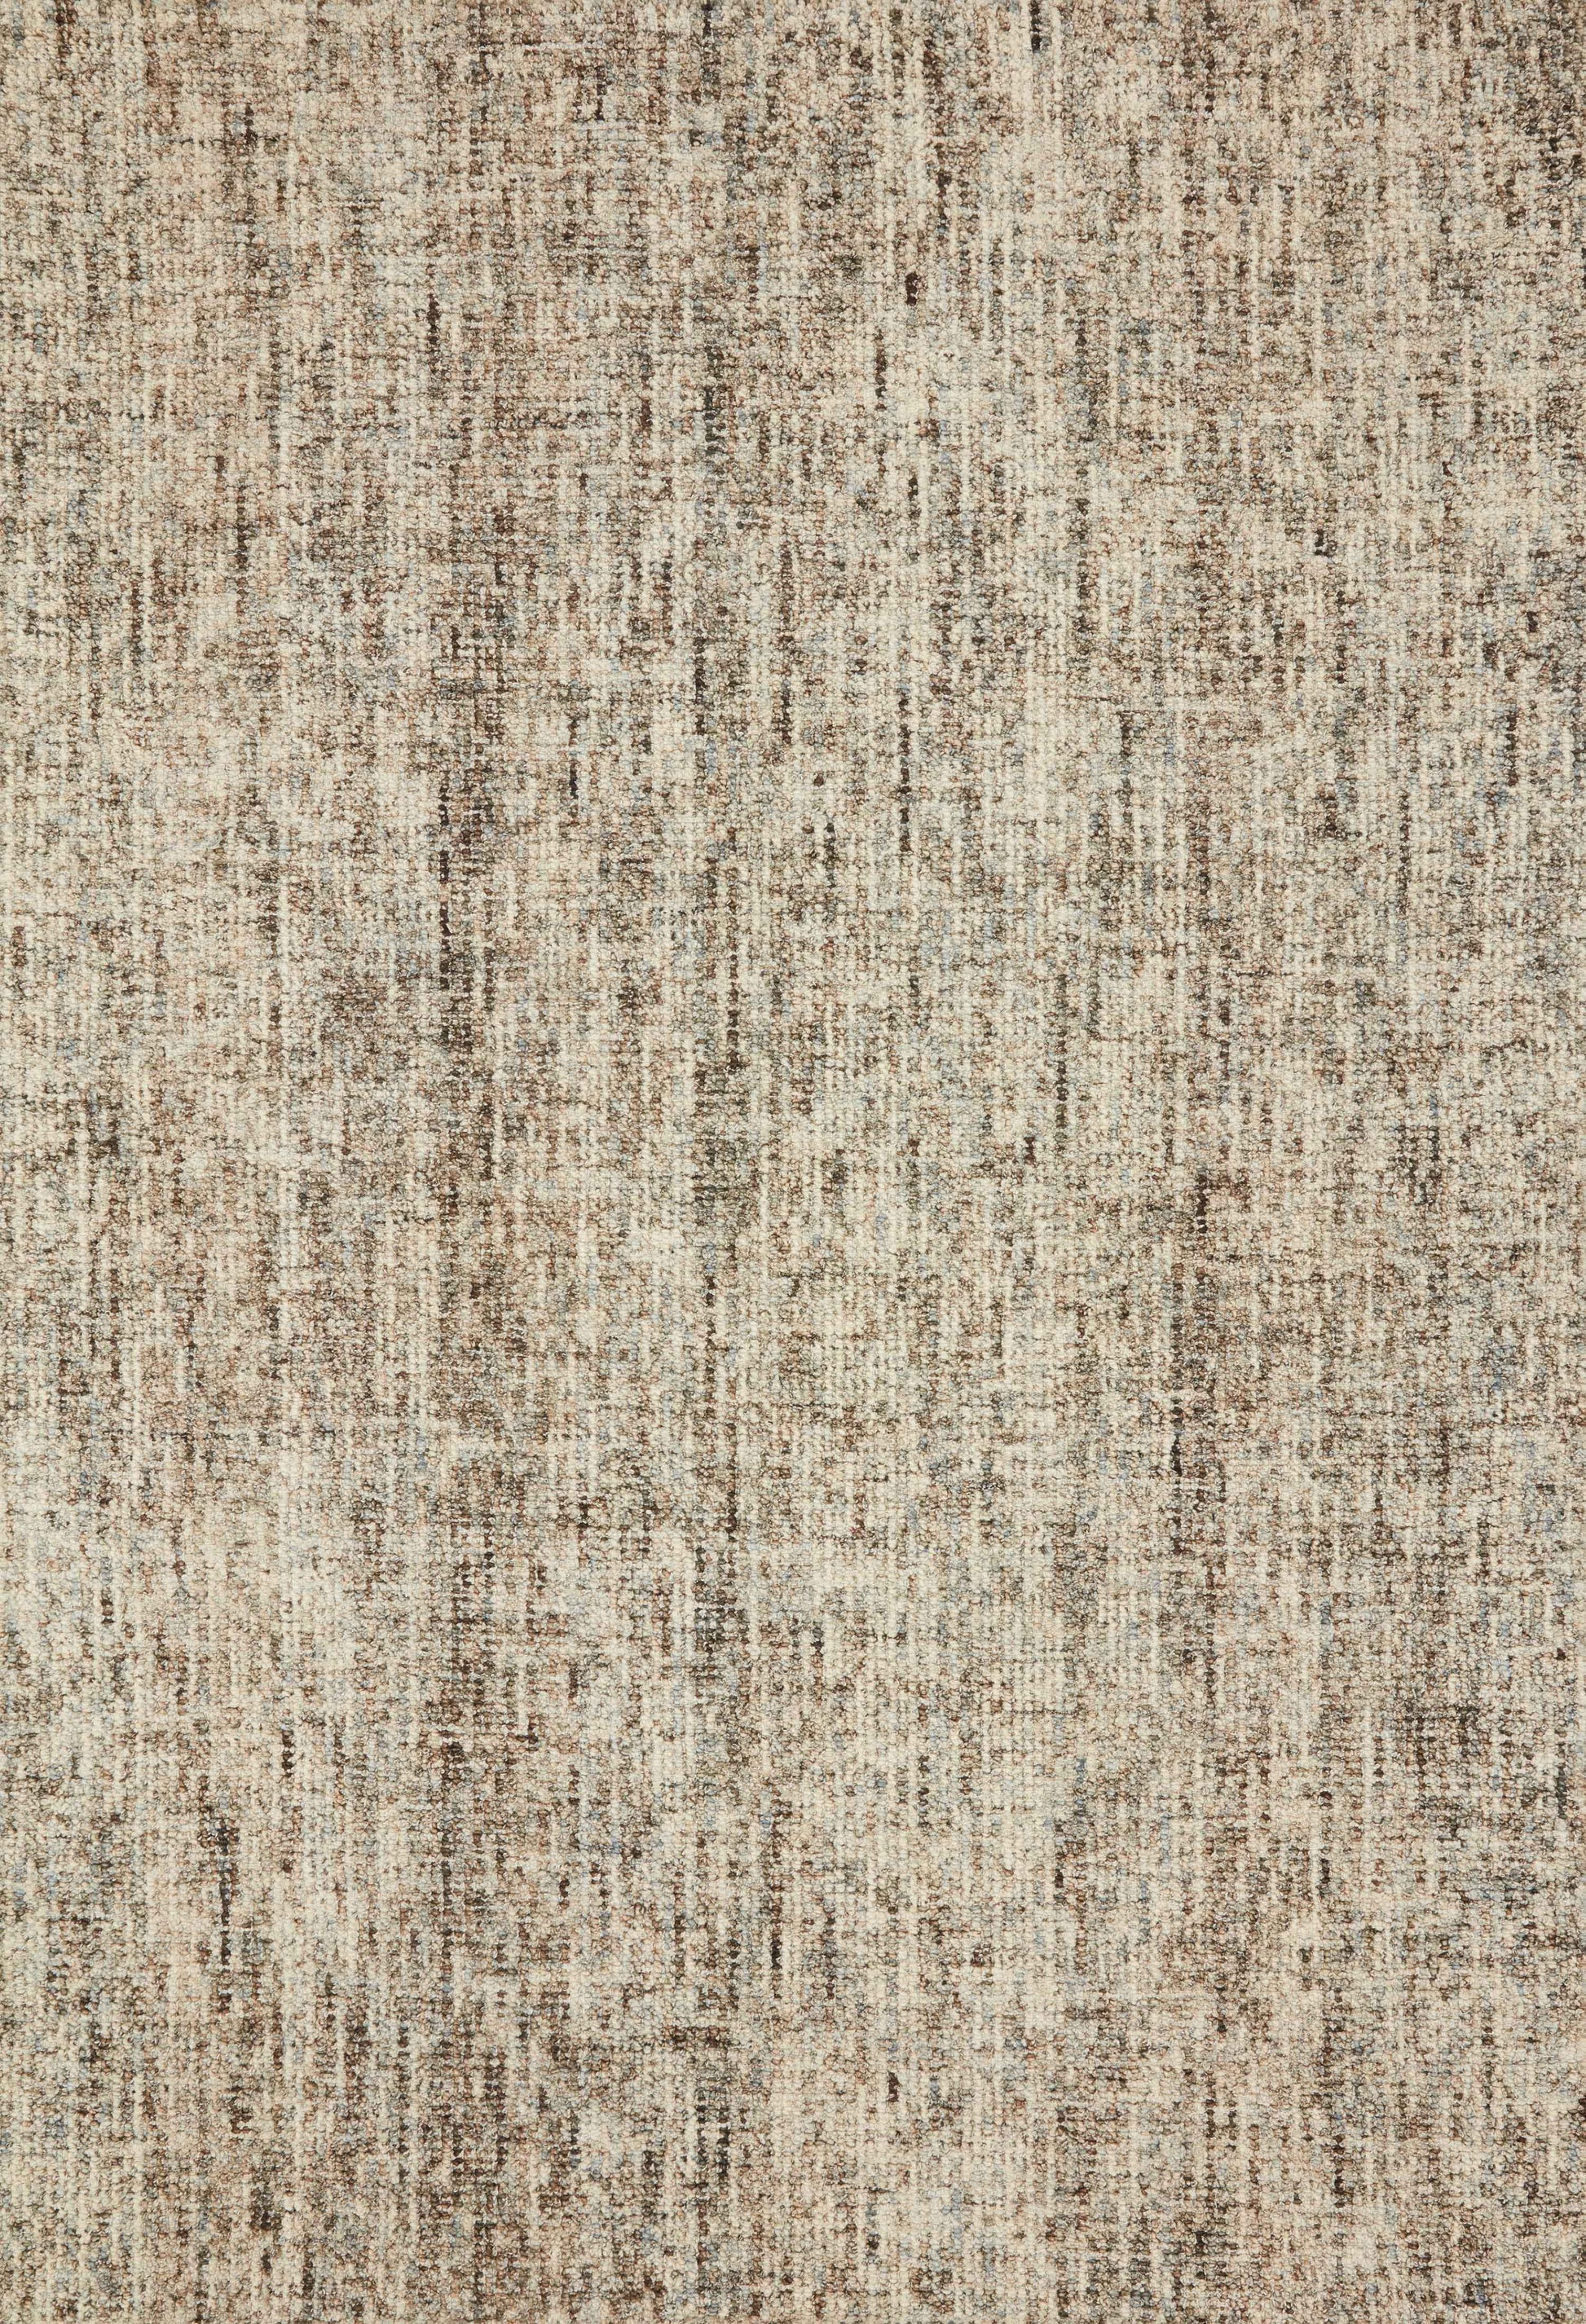 A picture of Loloi's Harlow rug, in style HLO-01, color Mocha / Mist